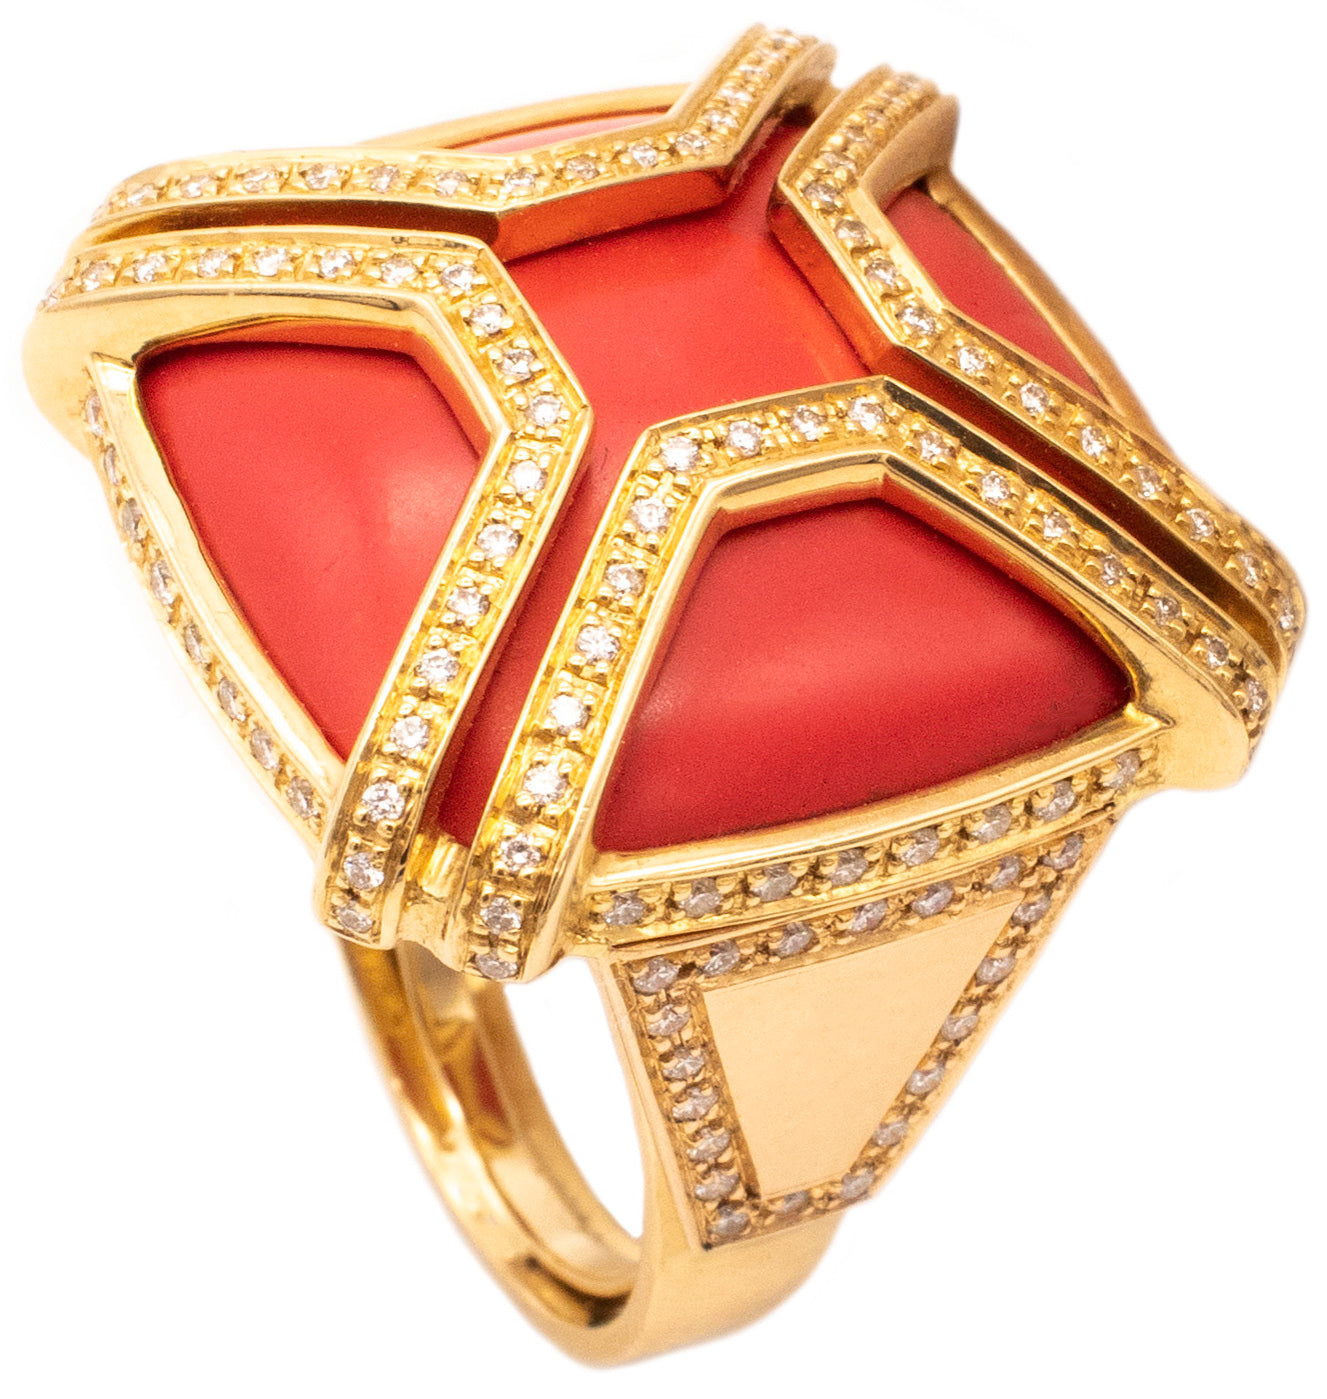 DI MODOLO MODERN 18 KT YELLOW GOLD RING WITH 1.50 Ctw IN DIAMONDS AND CORAL